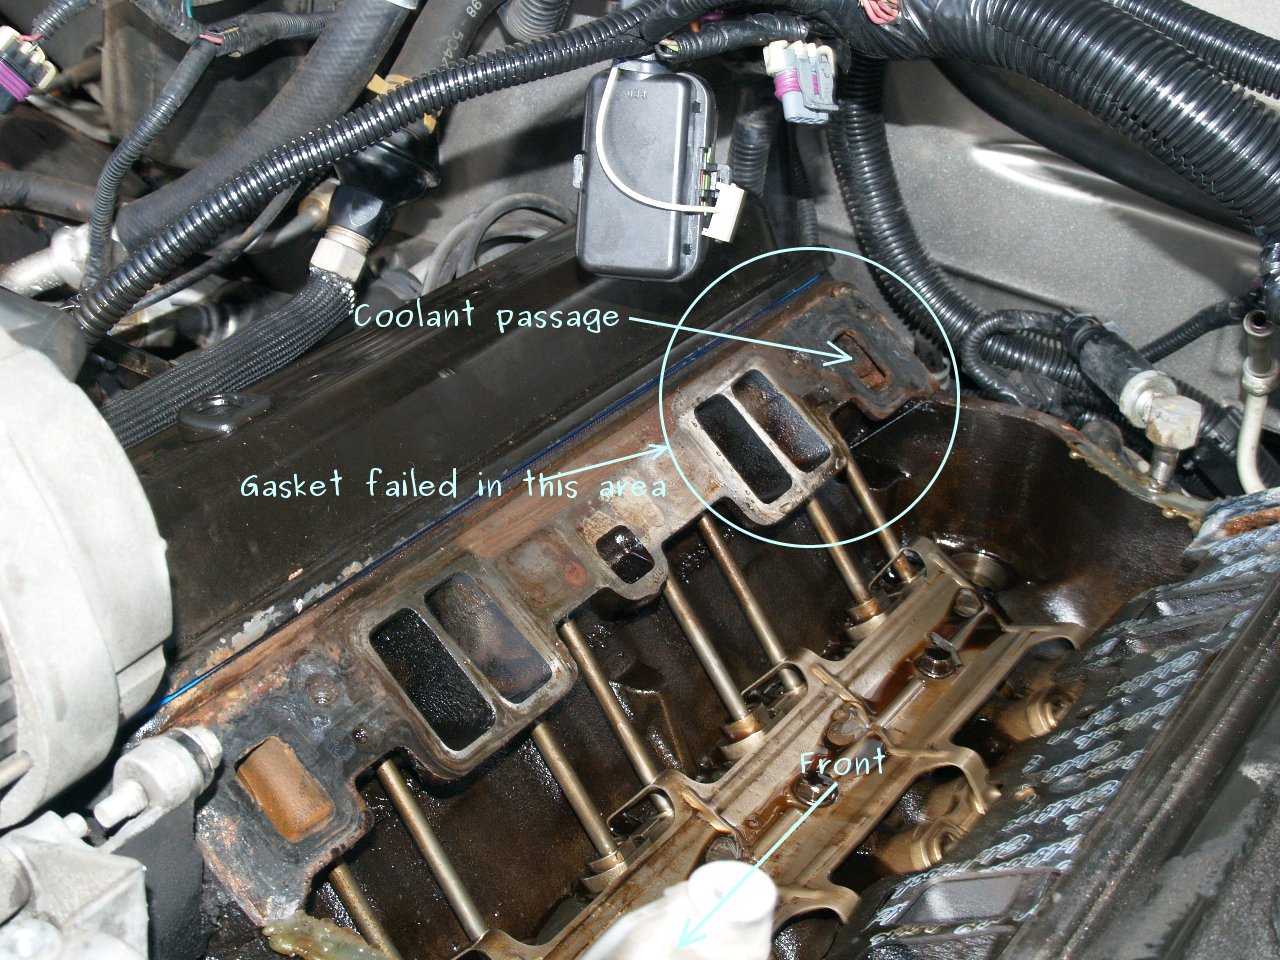 See P0670 in engine